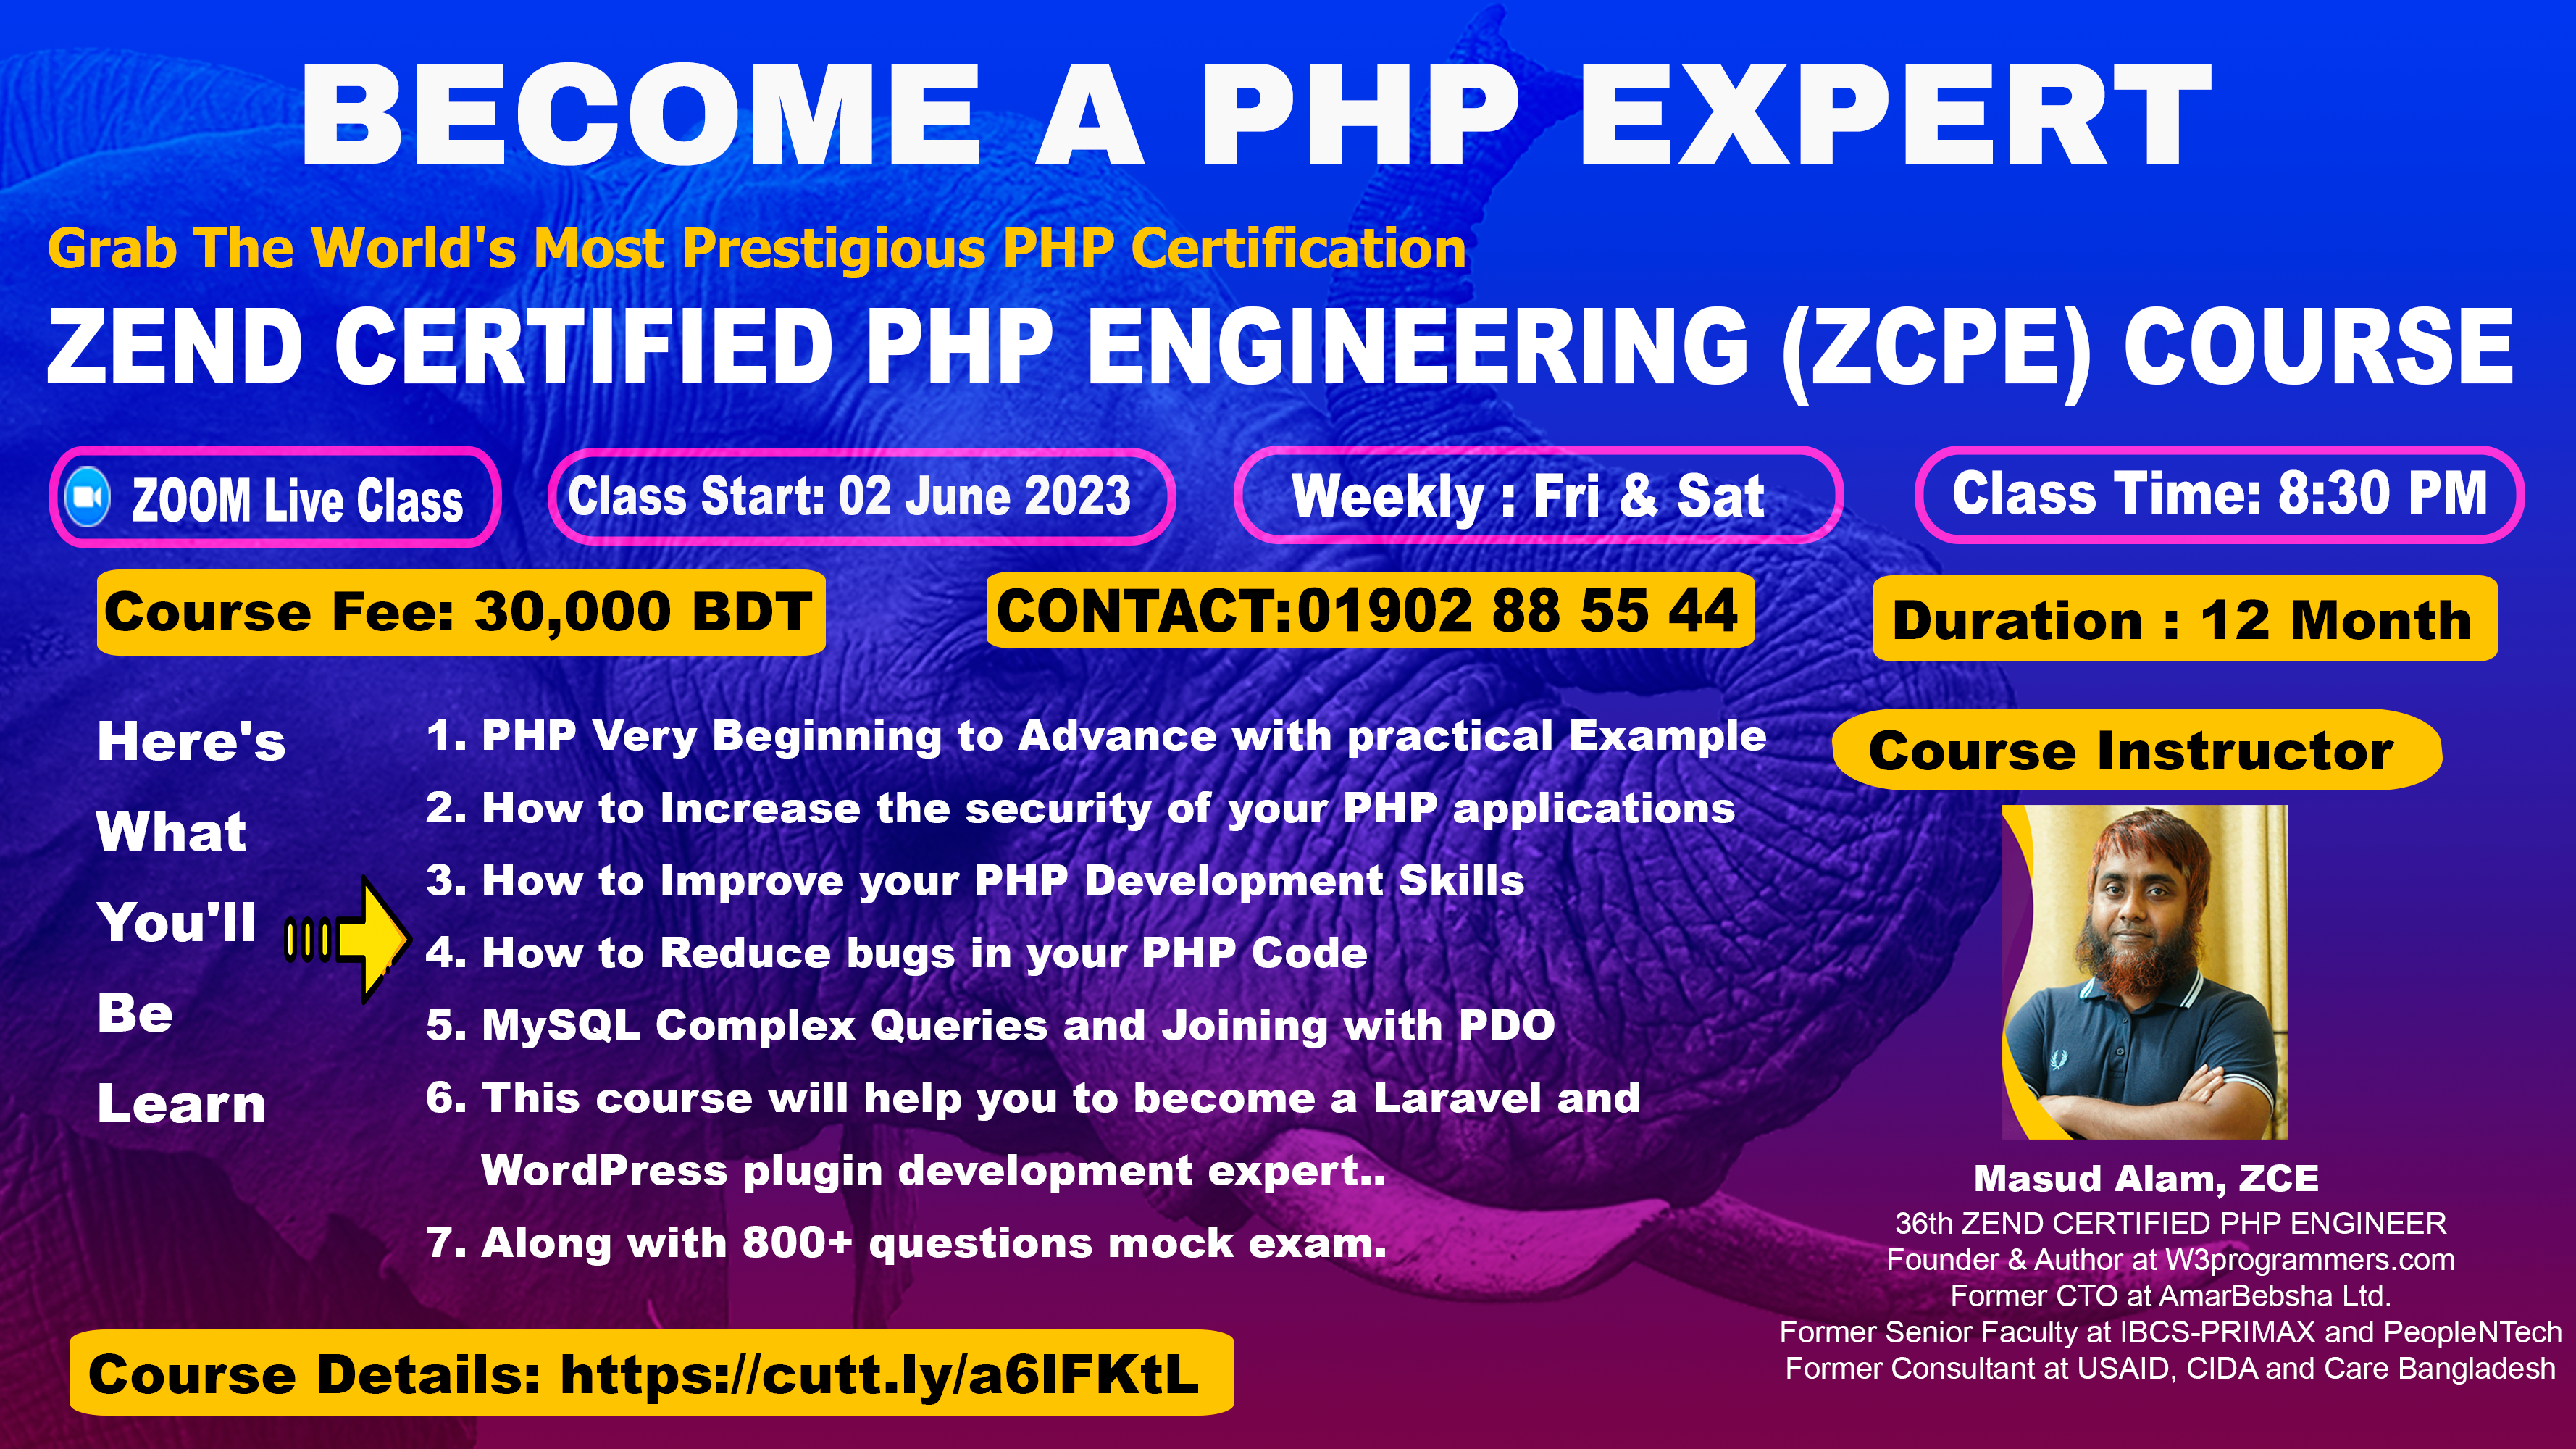 ZEND Certified PHP Engineering Course